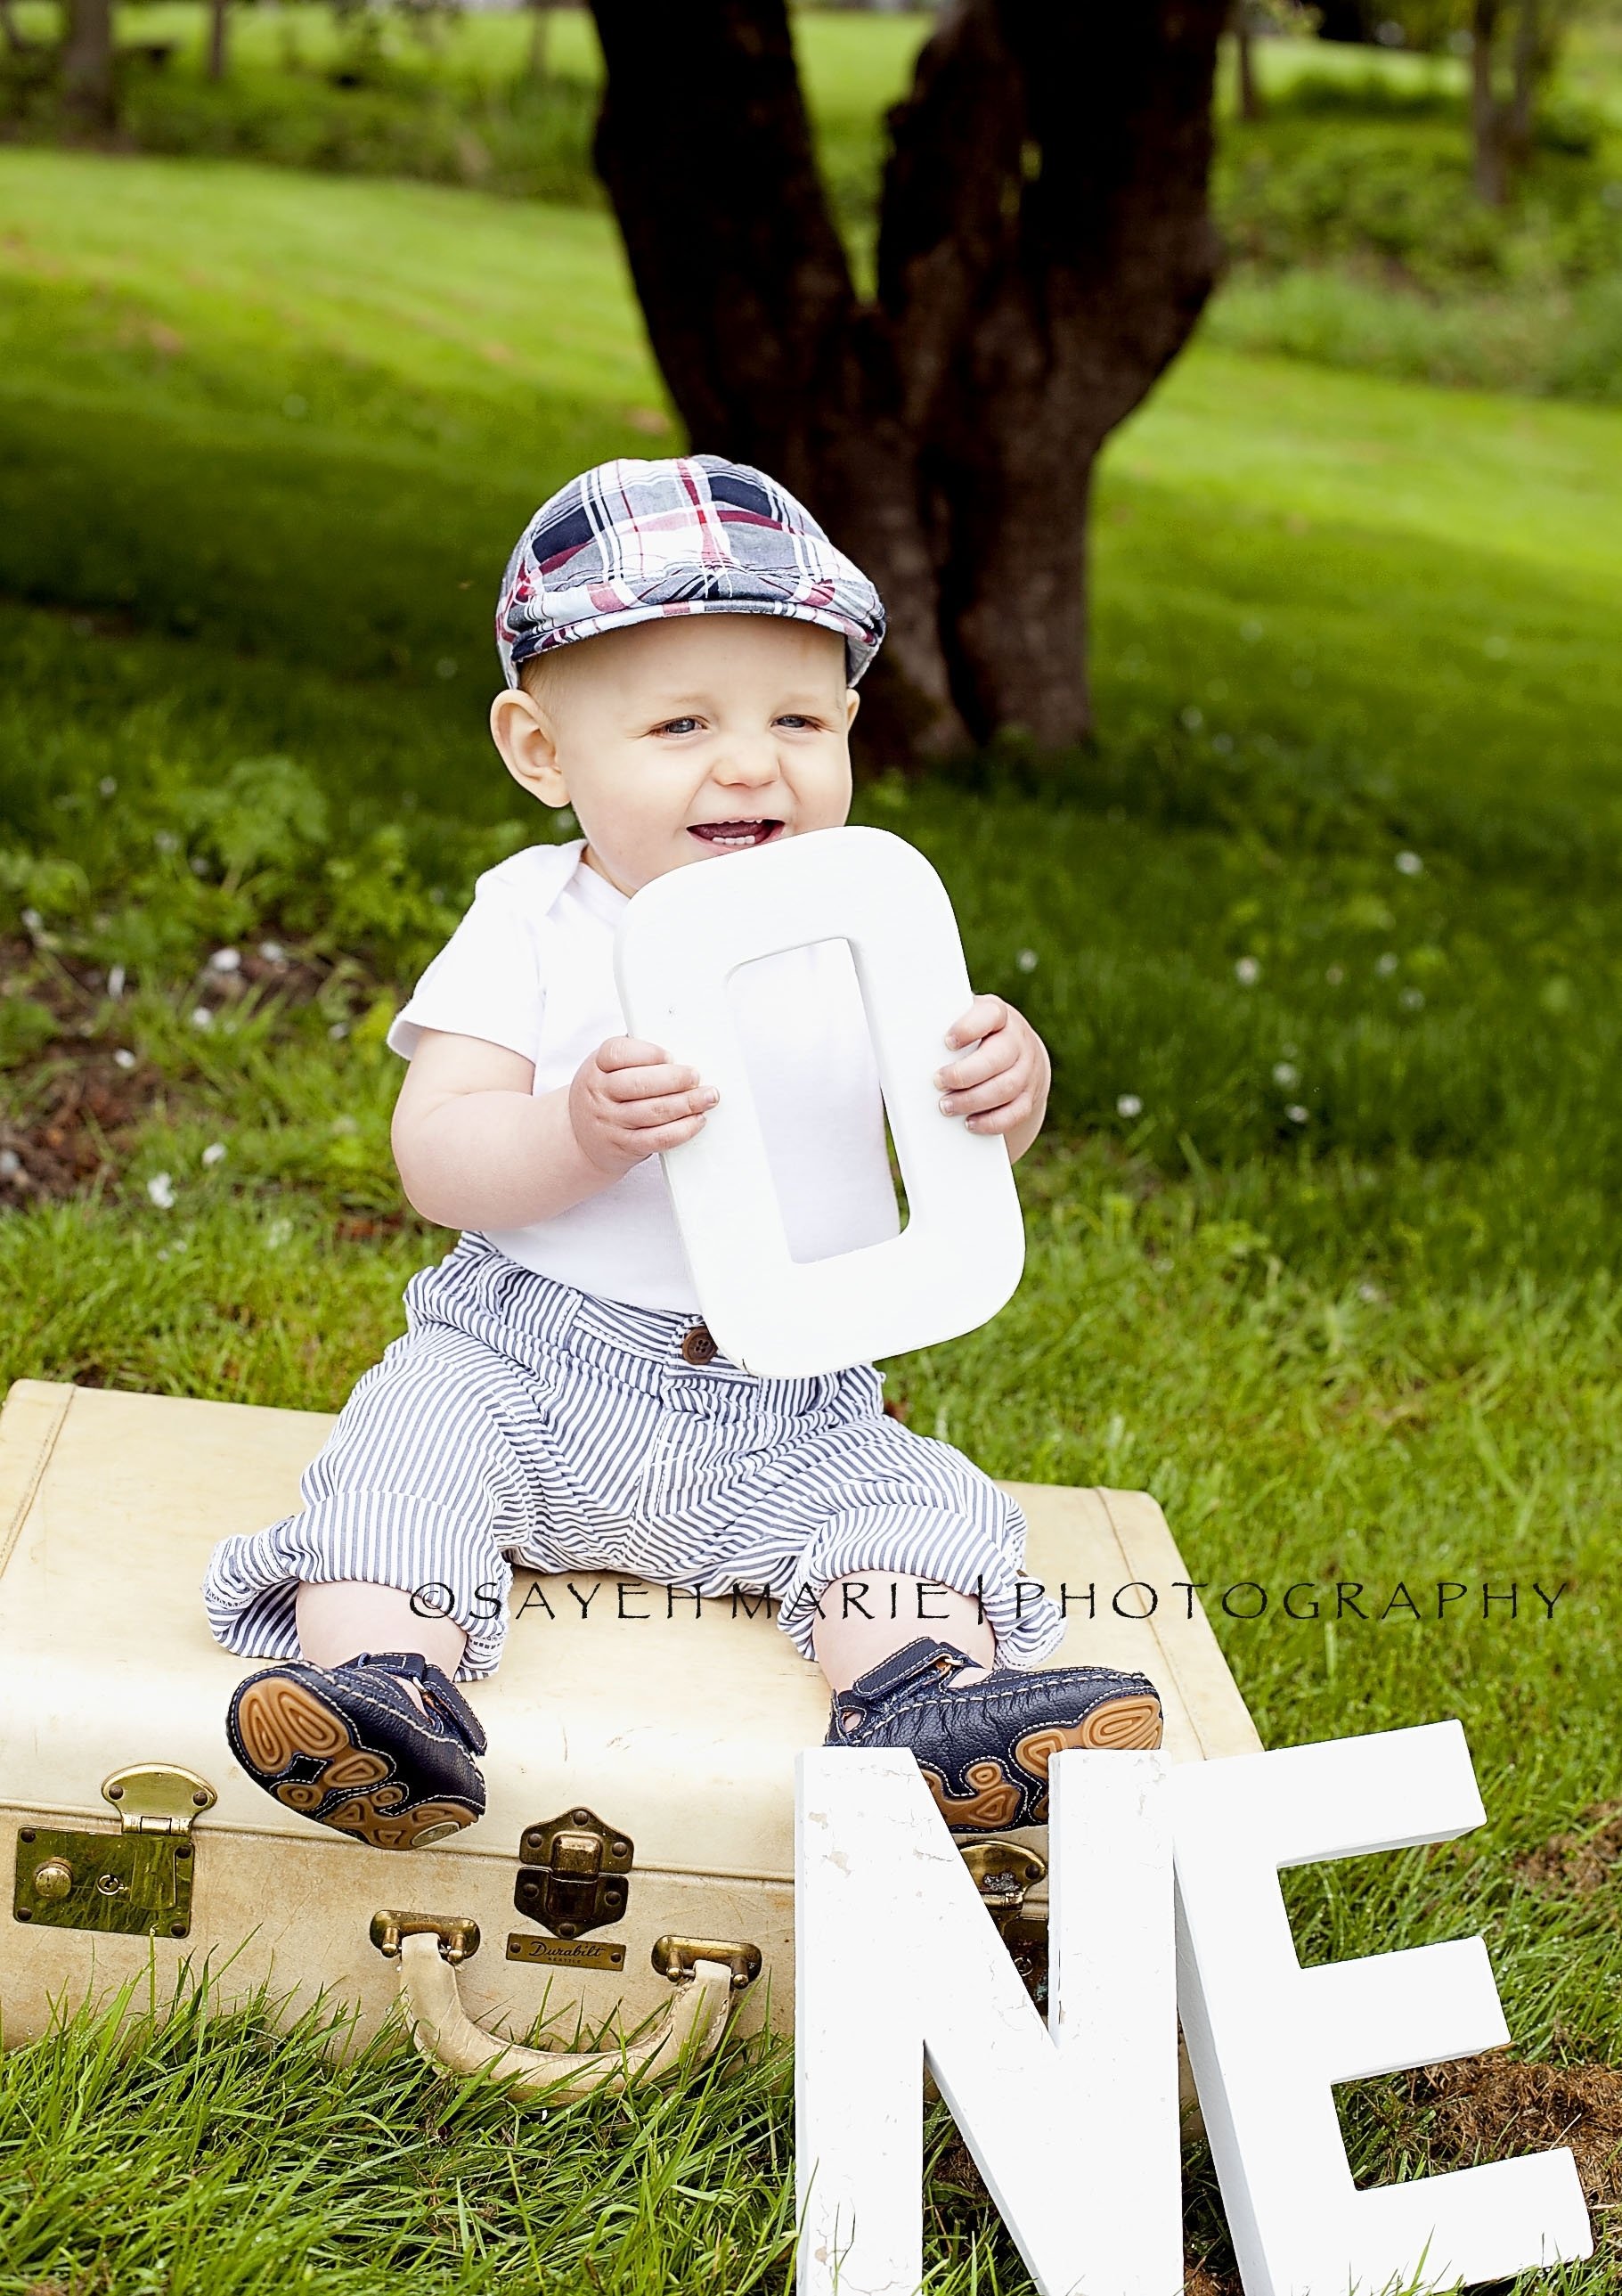 10 Fabulous 1 Year Old Photo Ideas one year old baby boy sayeh marie photography pinterest 2023